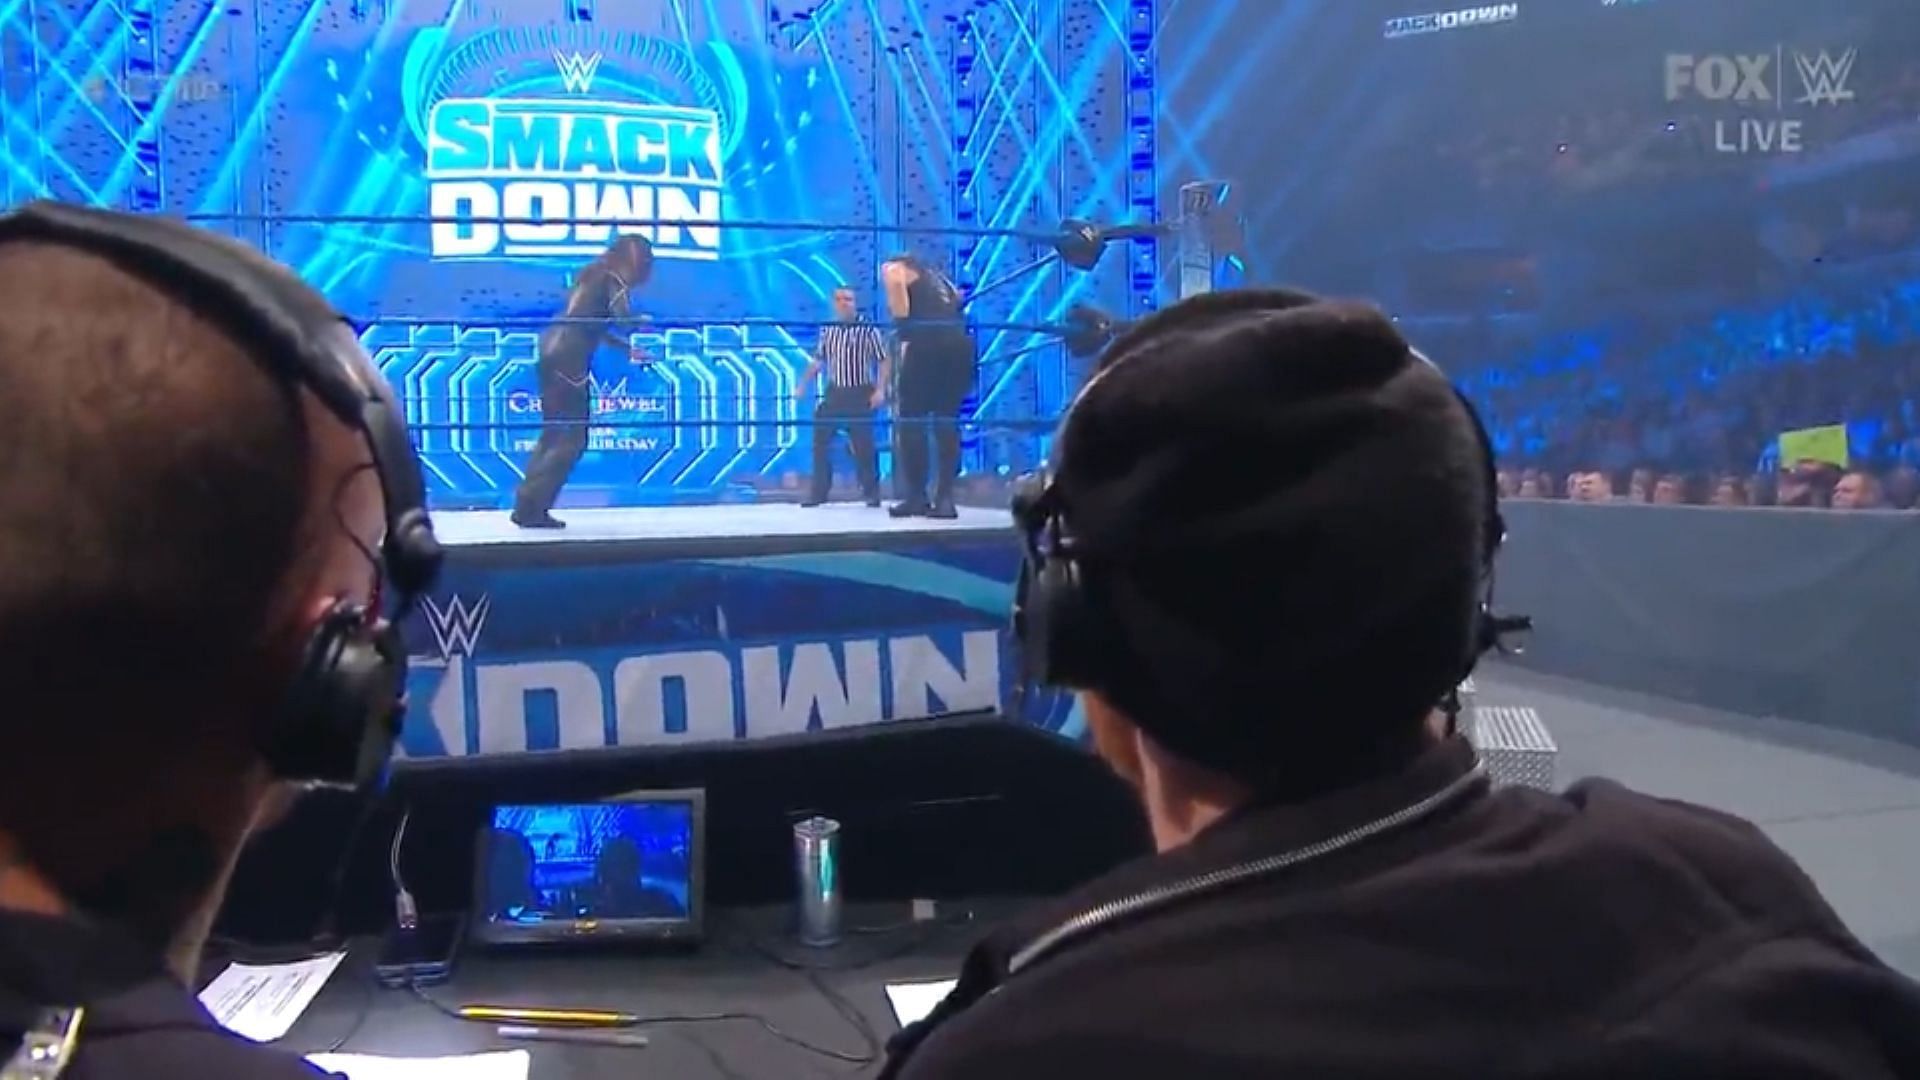 A look at the ring from the WWE SmackDown commentary table at ringside